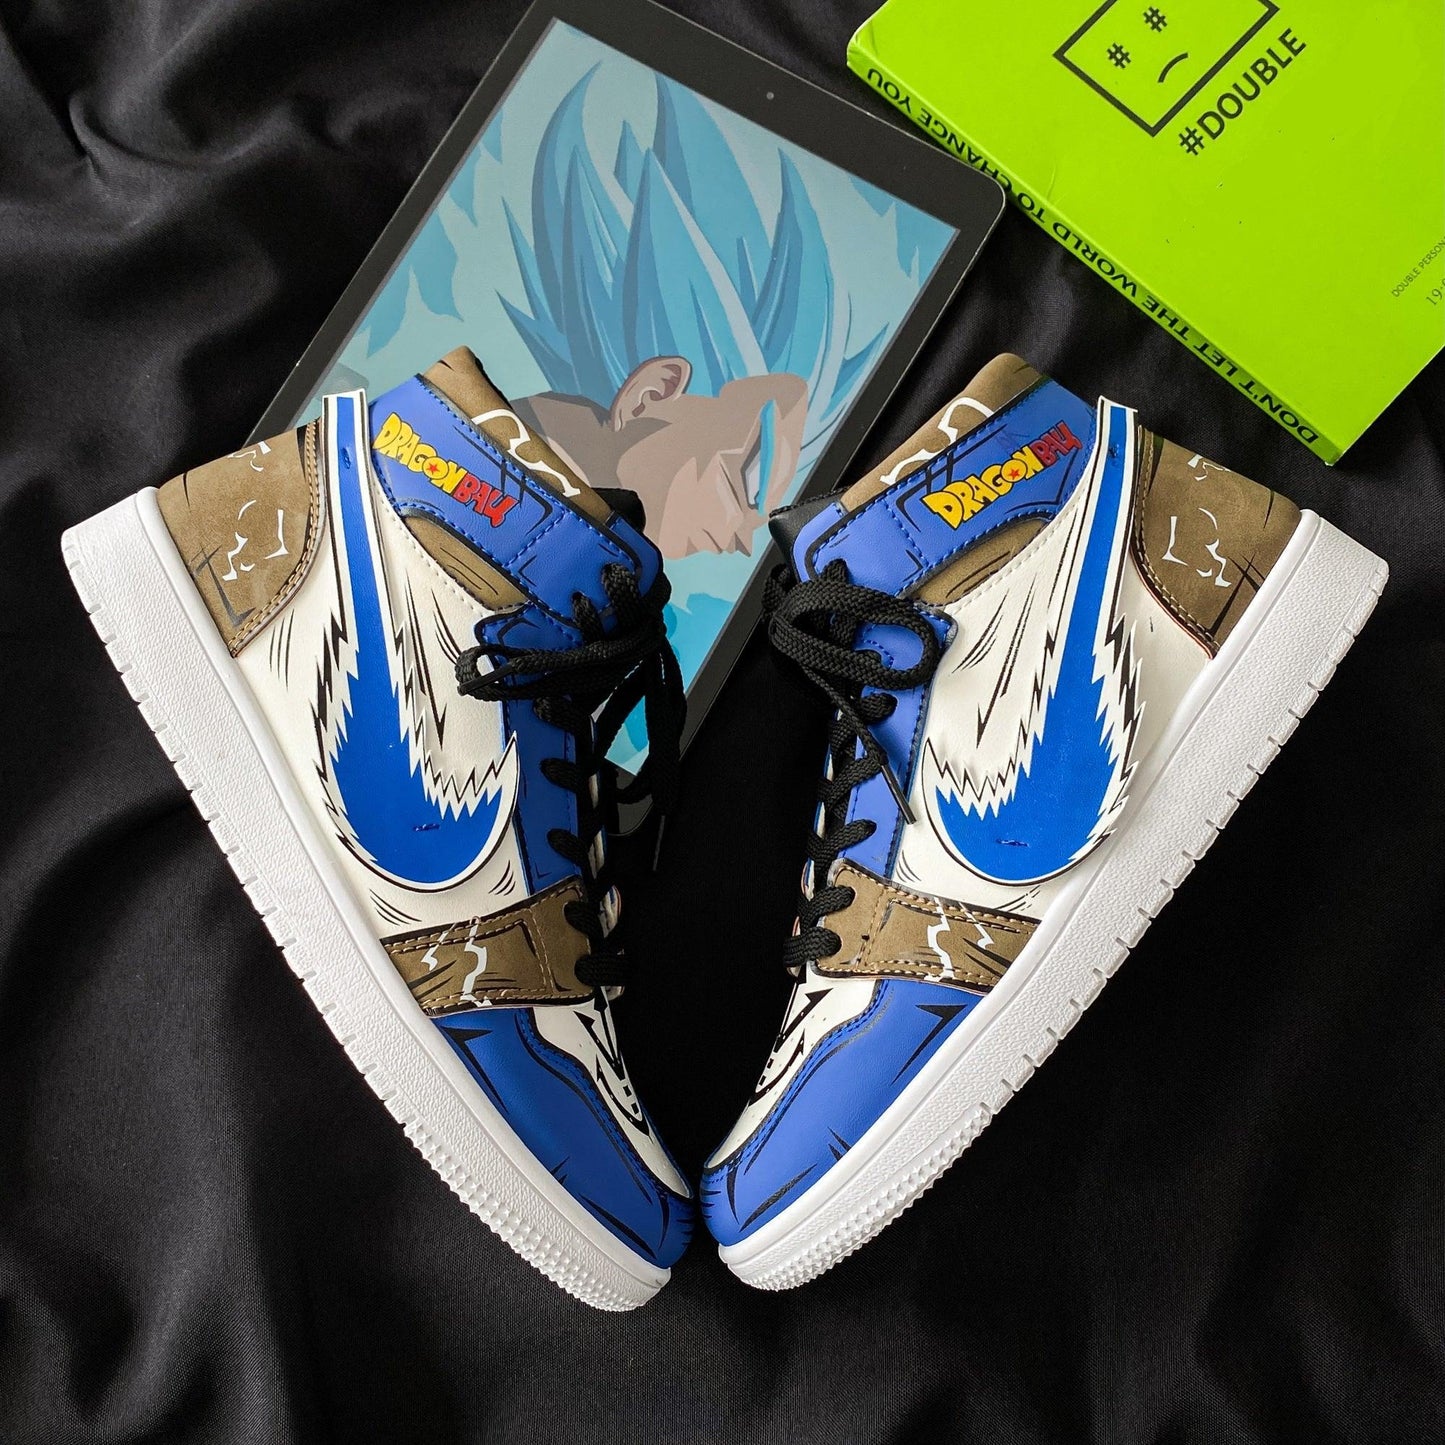 (Out of Stock) Dragon Ball Vegeta Blue High Top Shoes / Sneakers - AnimeGo Store